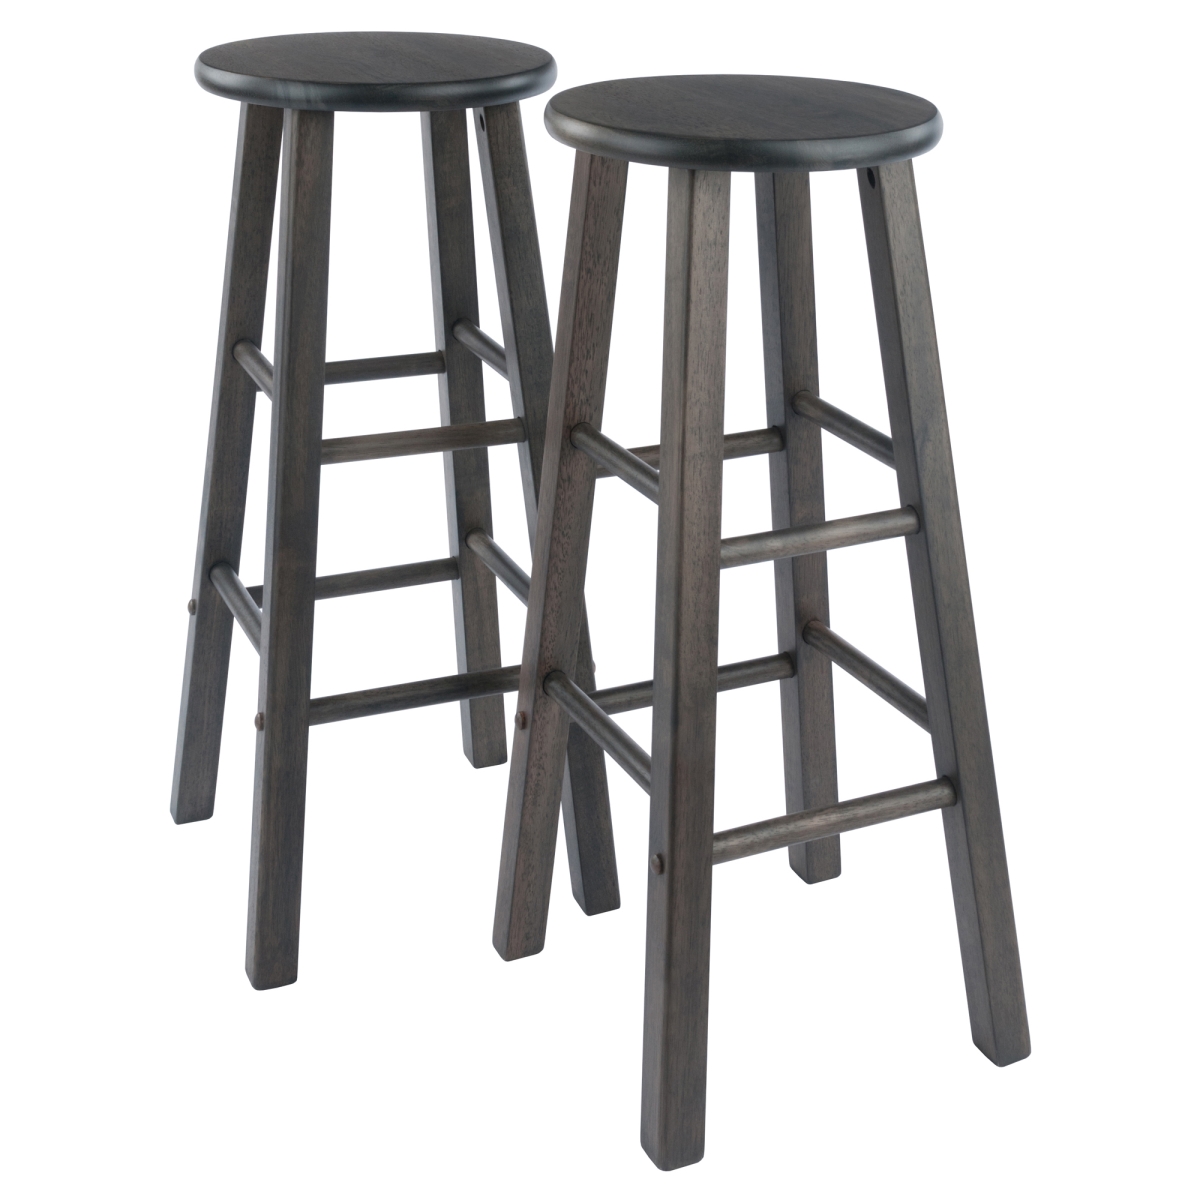 16270 29 In. Element Set Bar Stool, Oyster Gray - 2 Piece